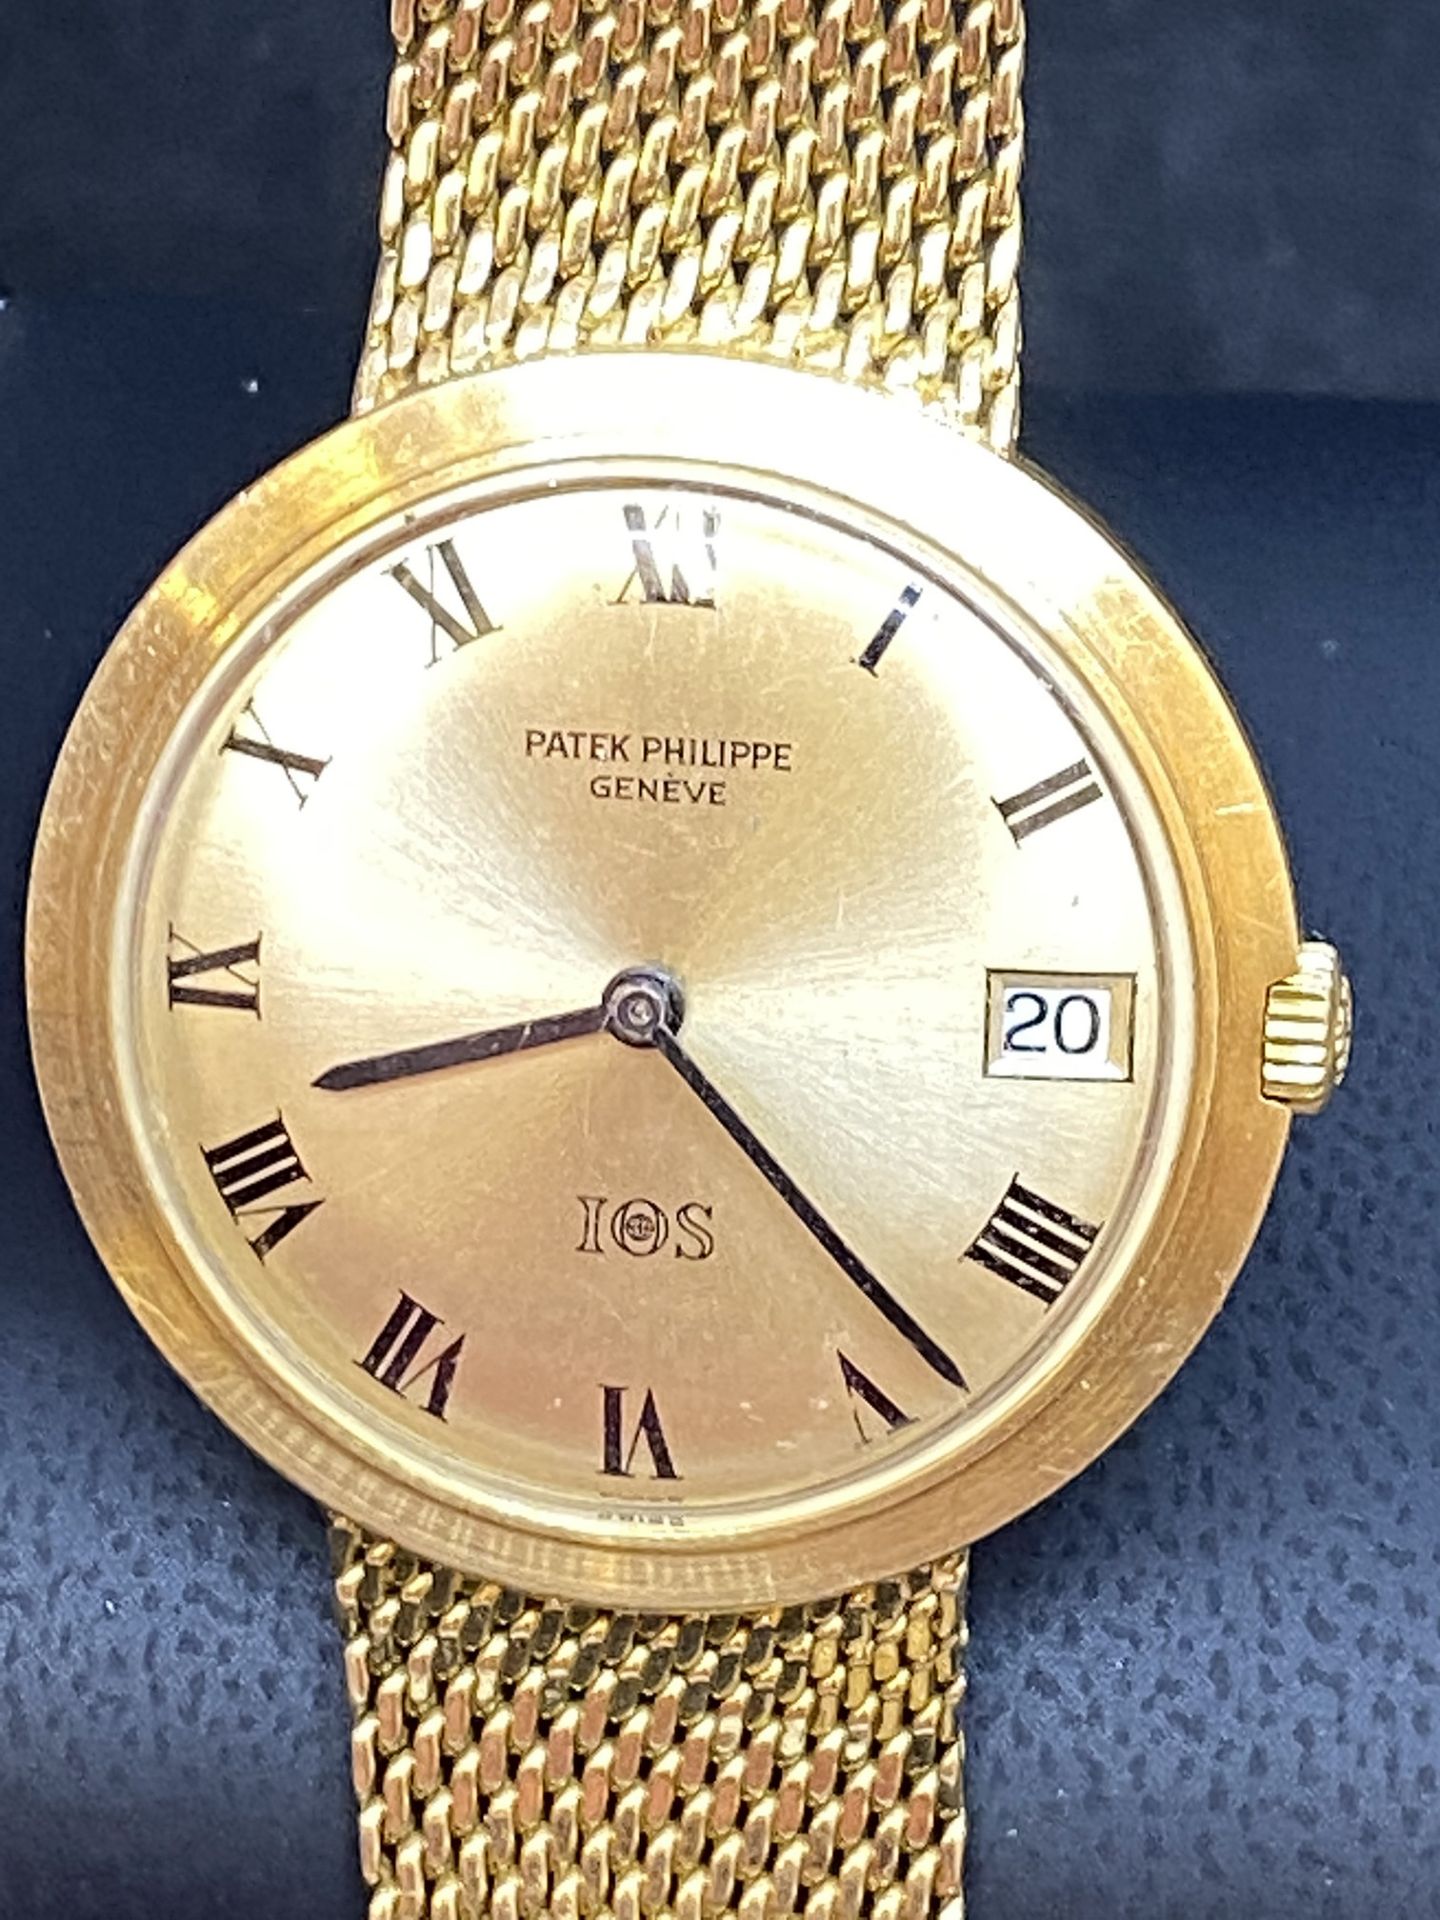 PATEK PHILIPPE 18ct GOLD GENTS AUTOMATIC WATCH - Image 4 of 21